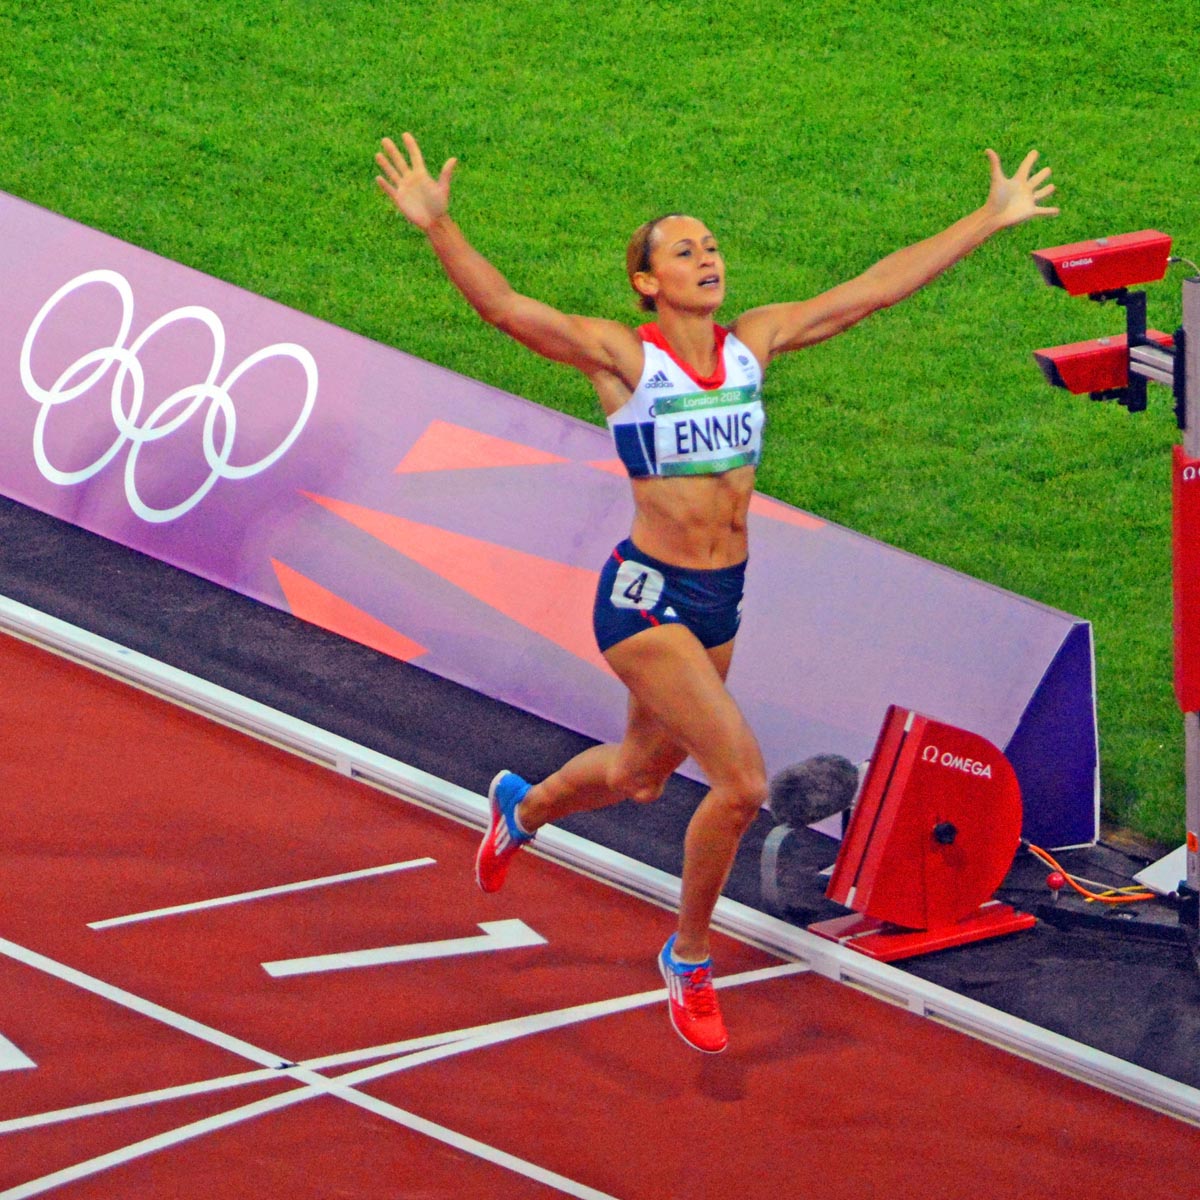 Great Britain national sports hero, Jessica Ennis, wins the women's heptathon gold medal by winning the women's 800 meter(AP Photo/Dick Druckman)